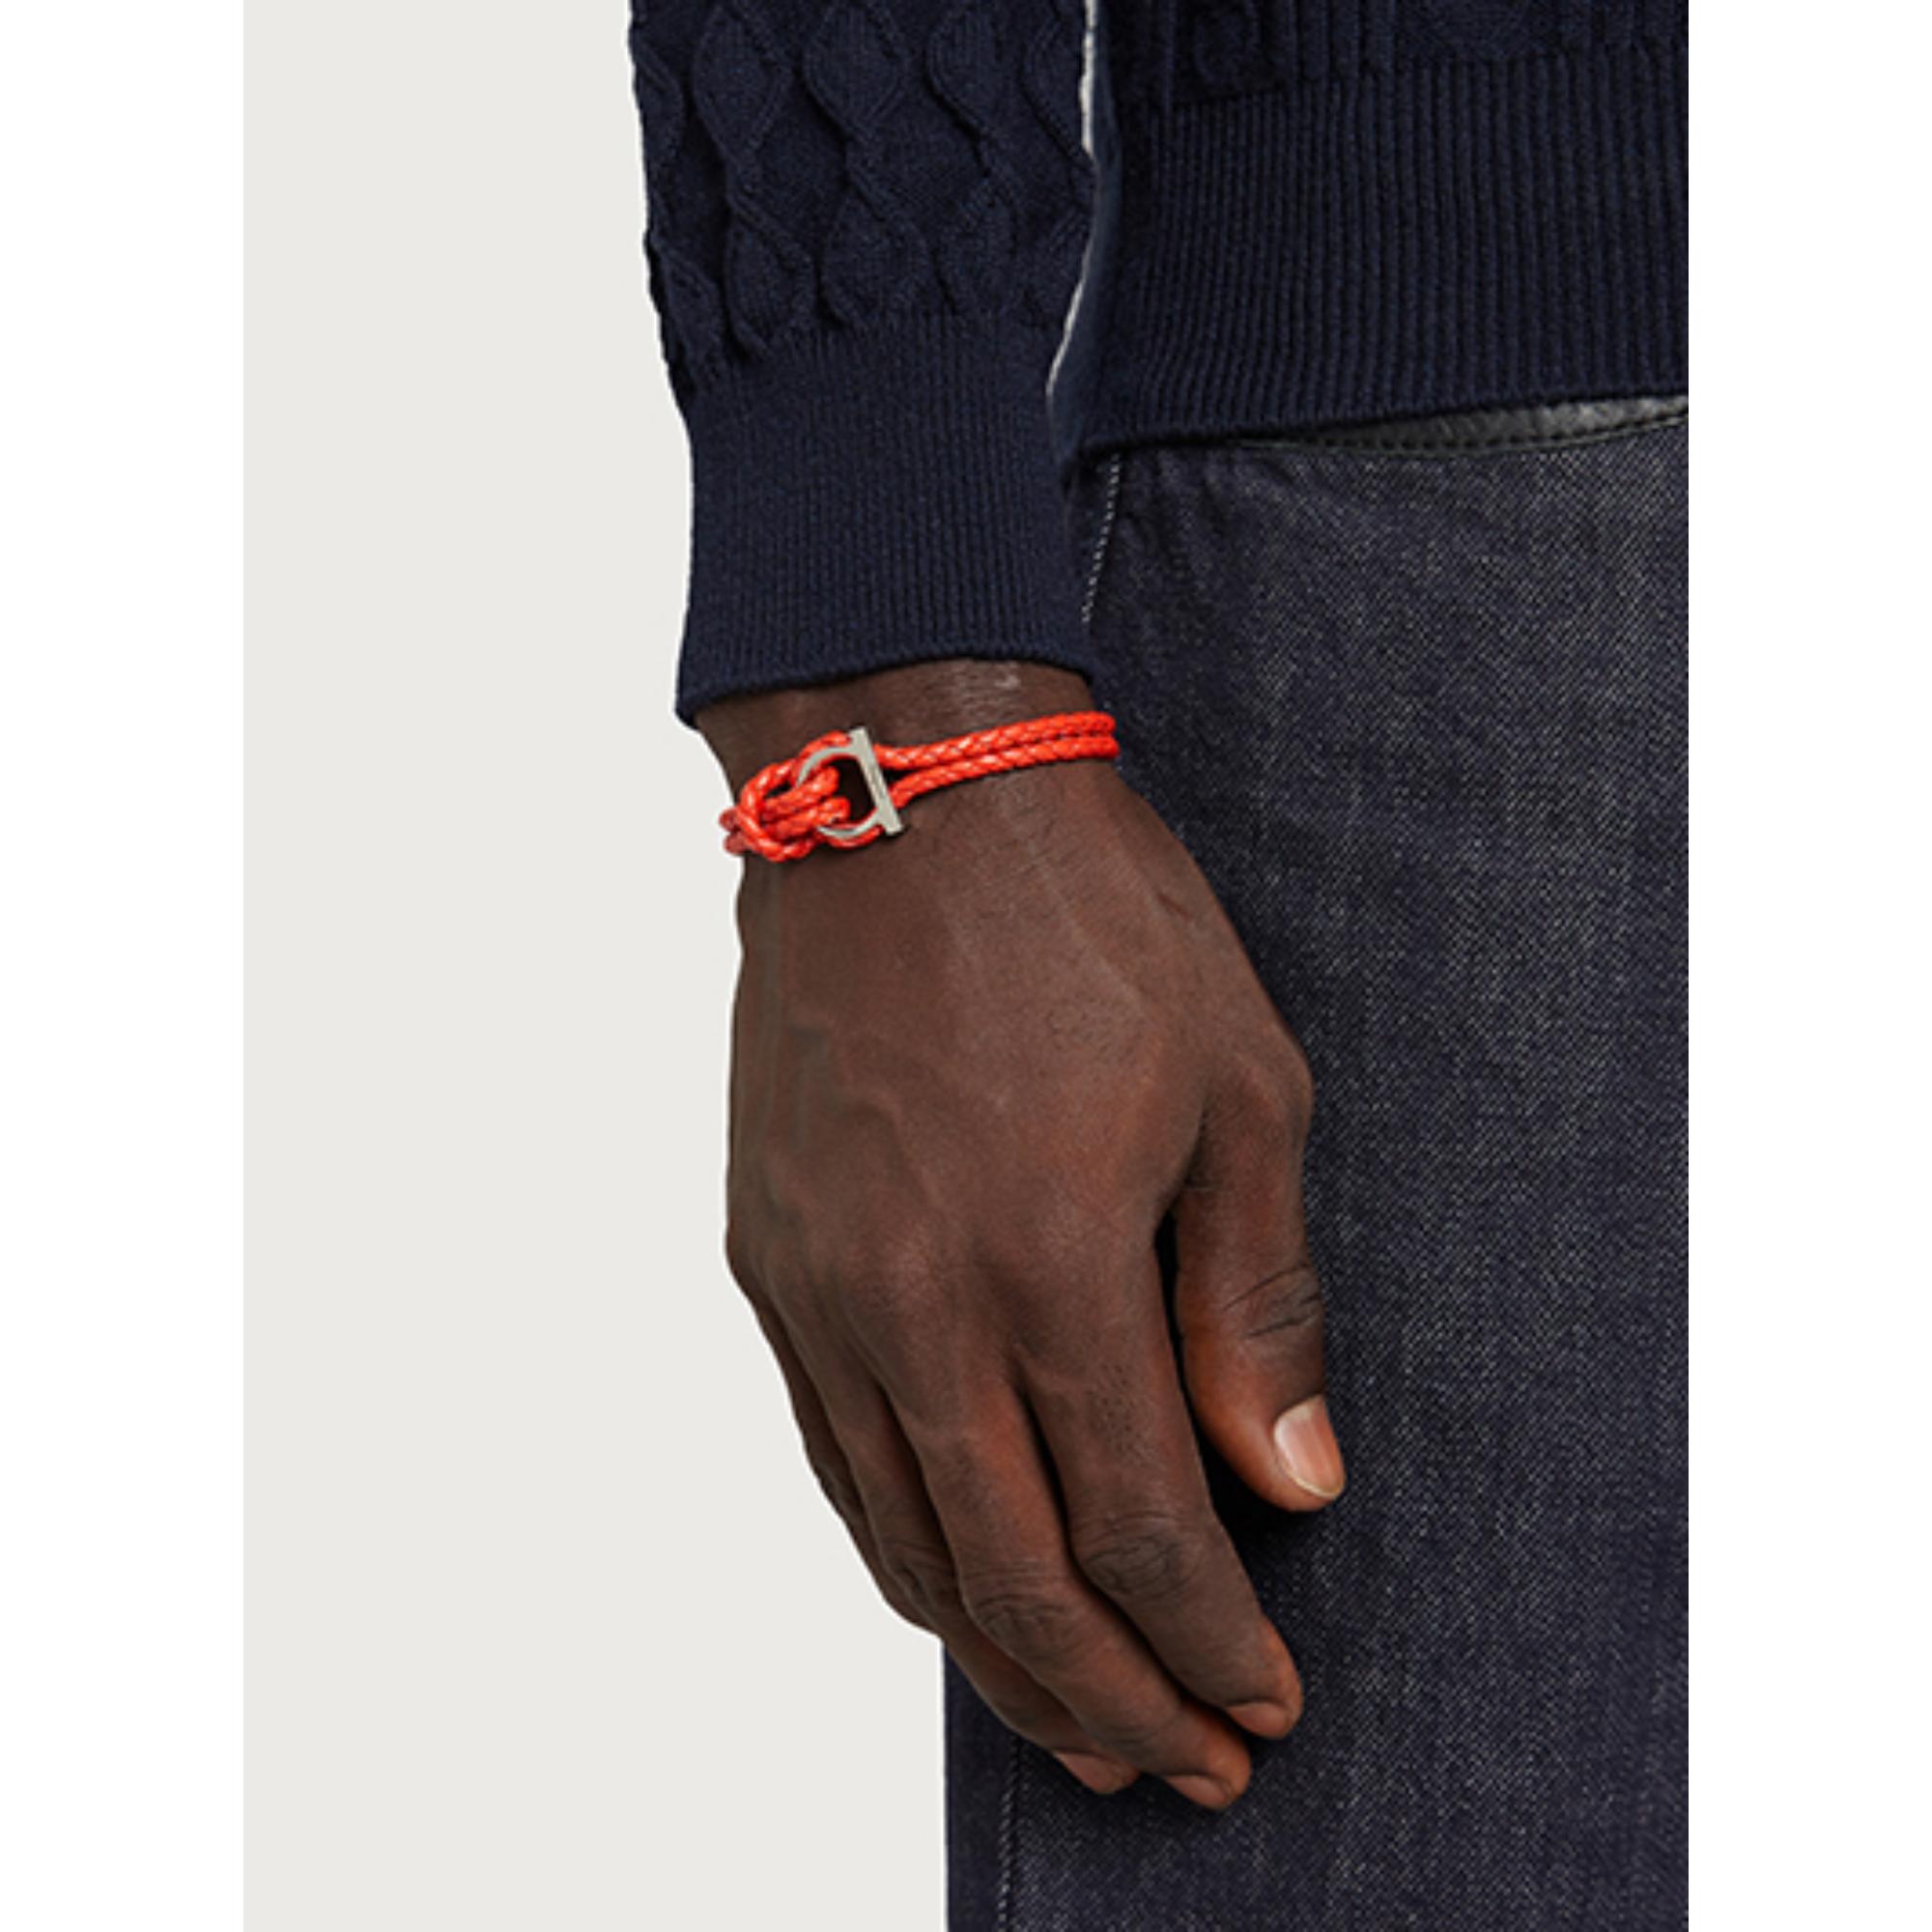 Gancini Bracelet in Brass, Steel and Leather - Candy Apple Red